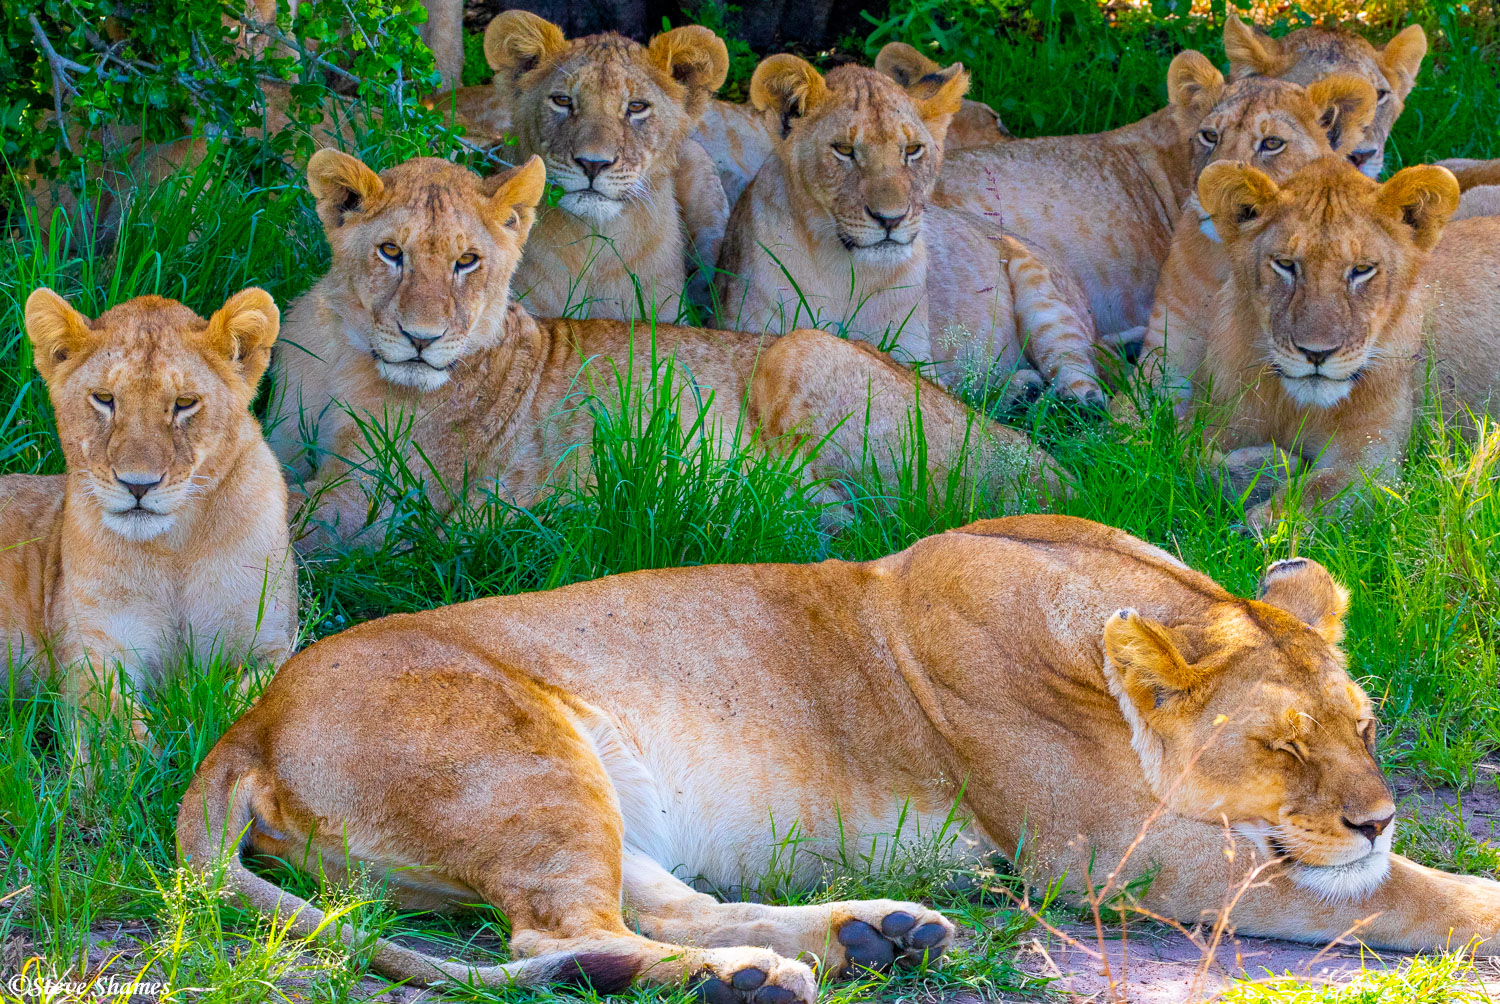 A family of lions resting in the shady grass, posing for a picture.